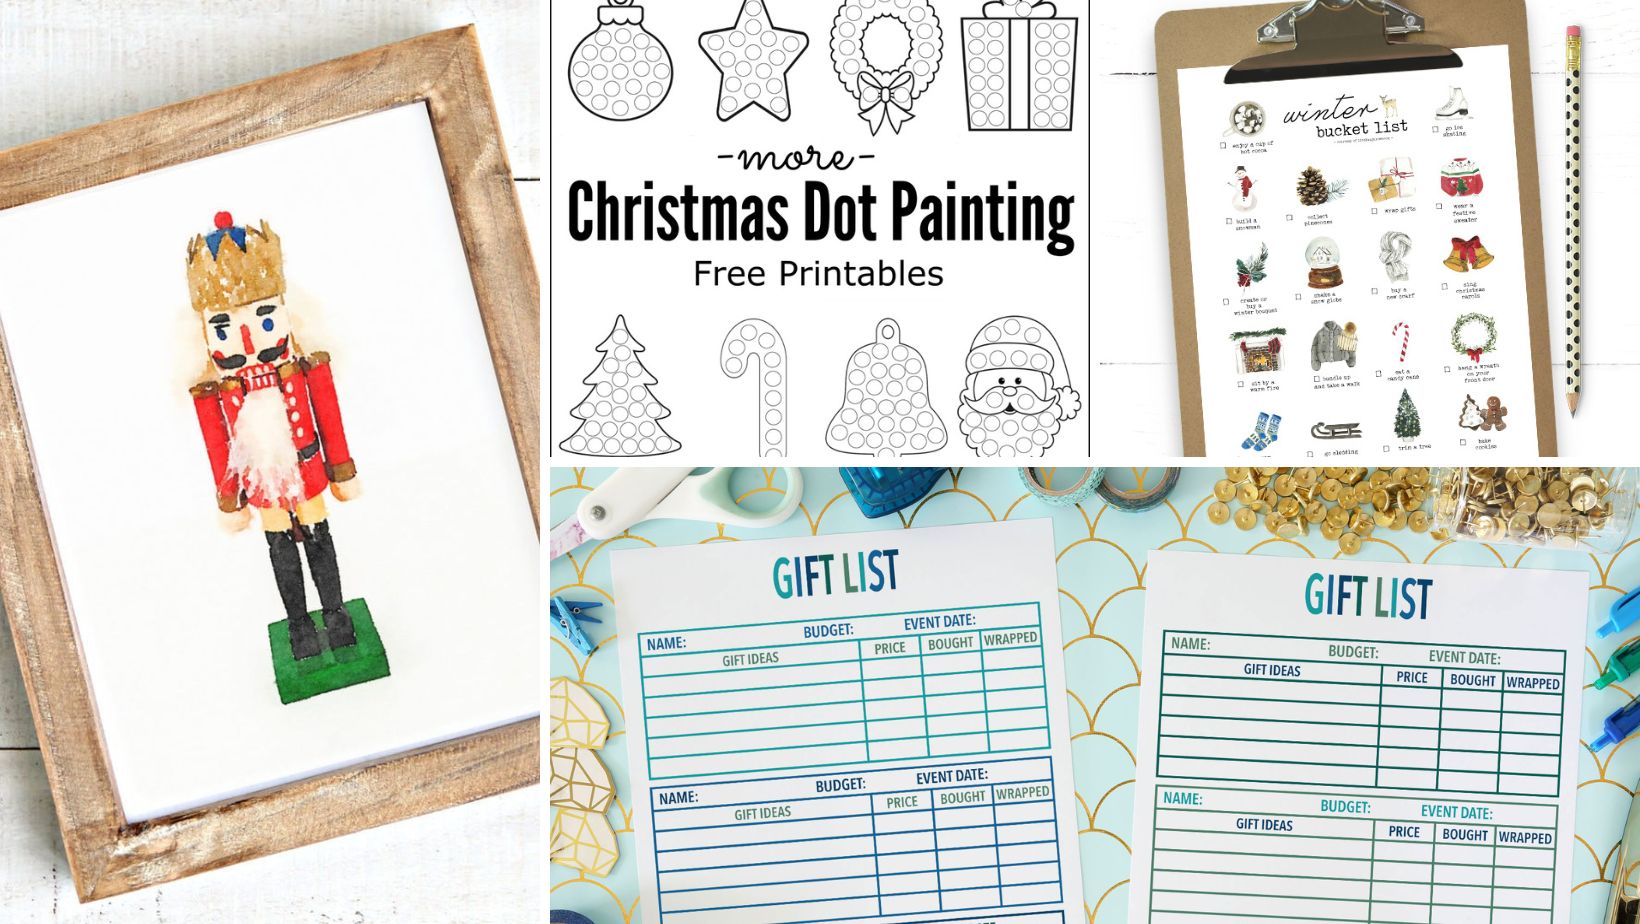 More Christmas Dot Painting {Free Printables} - The Resourceful Mama